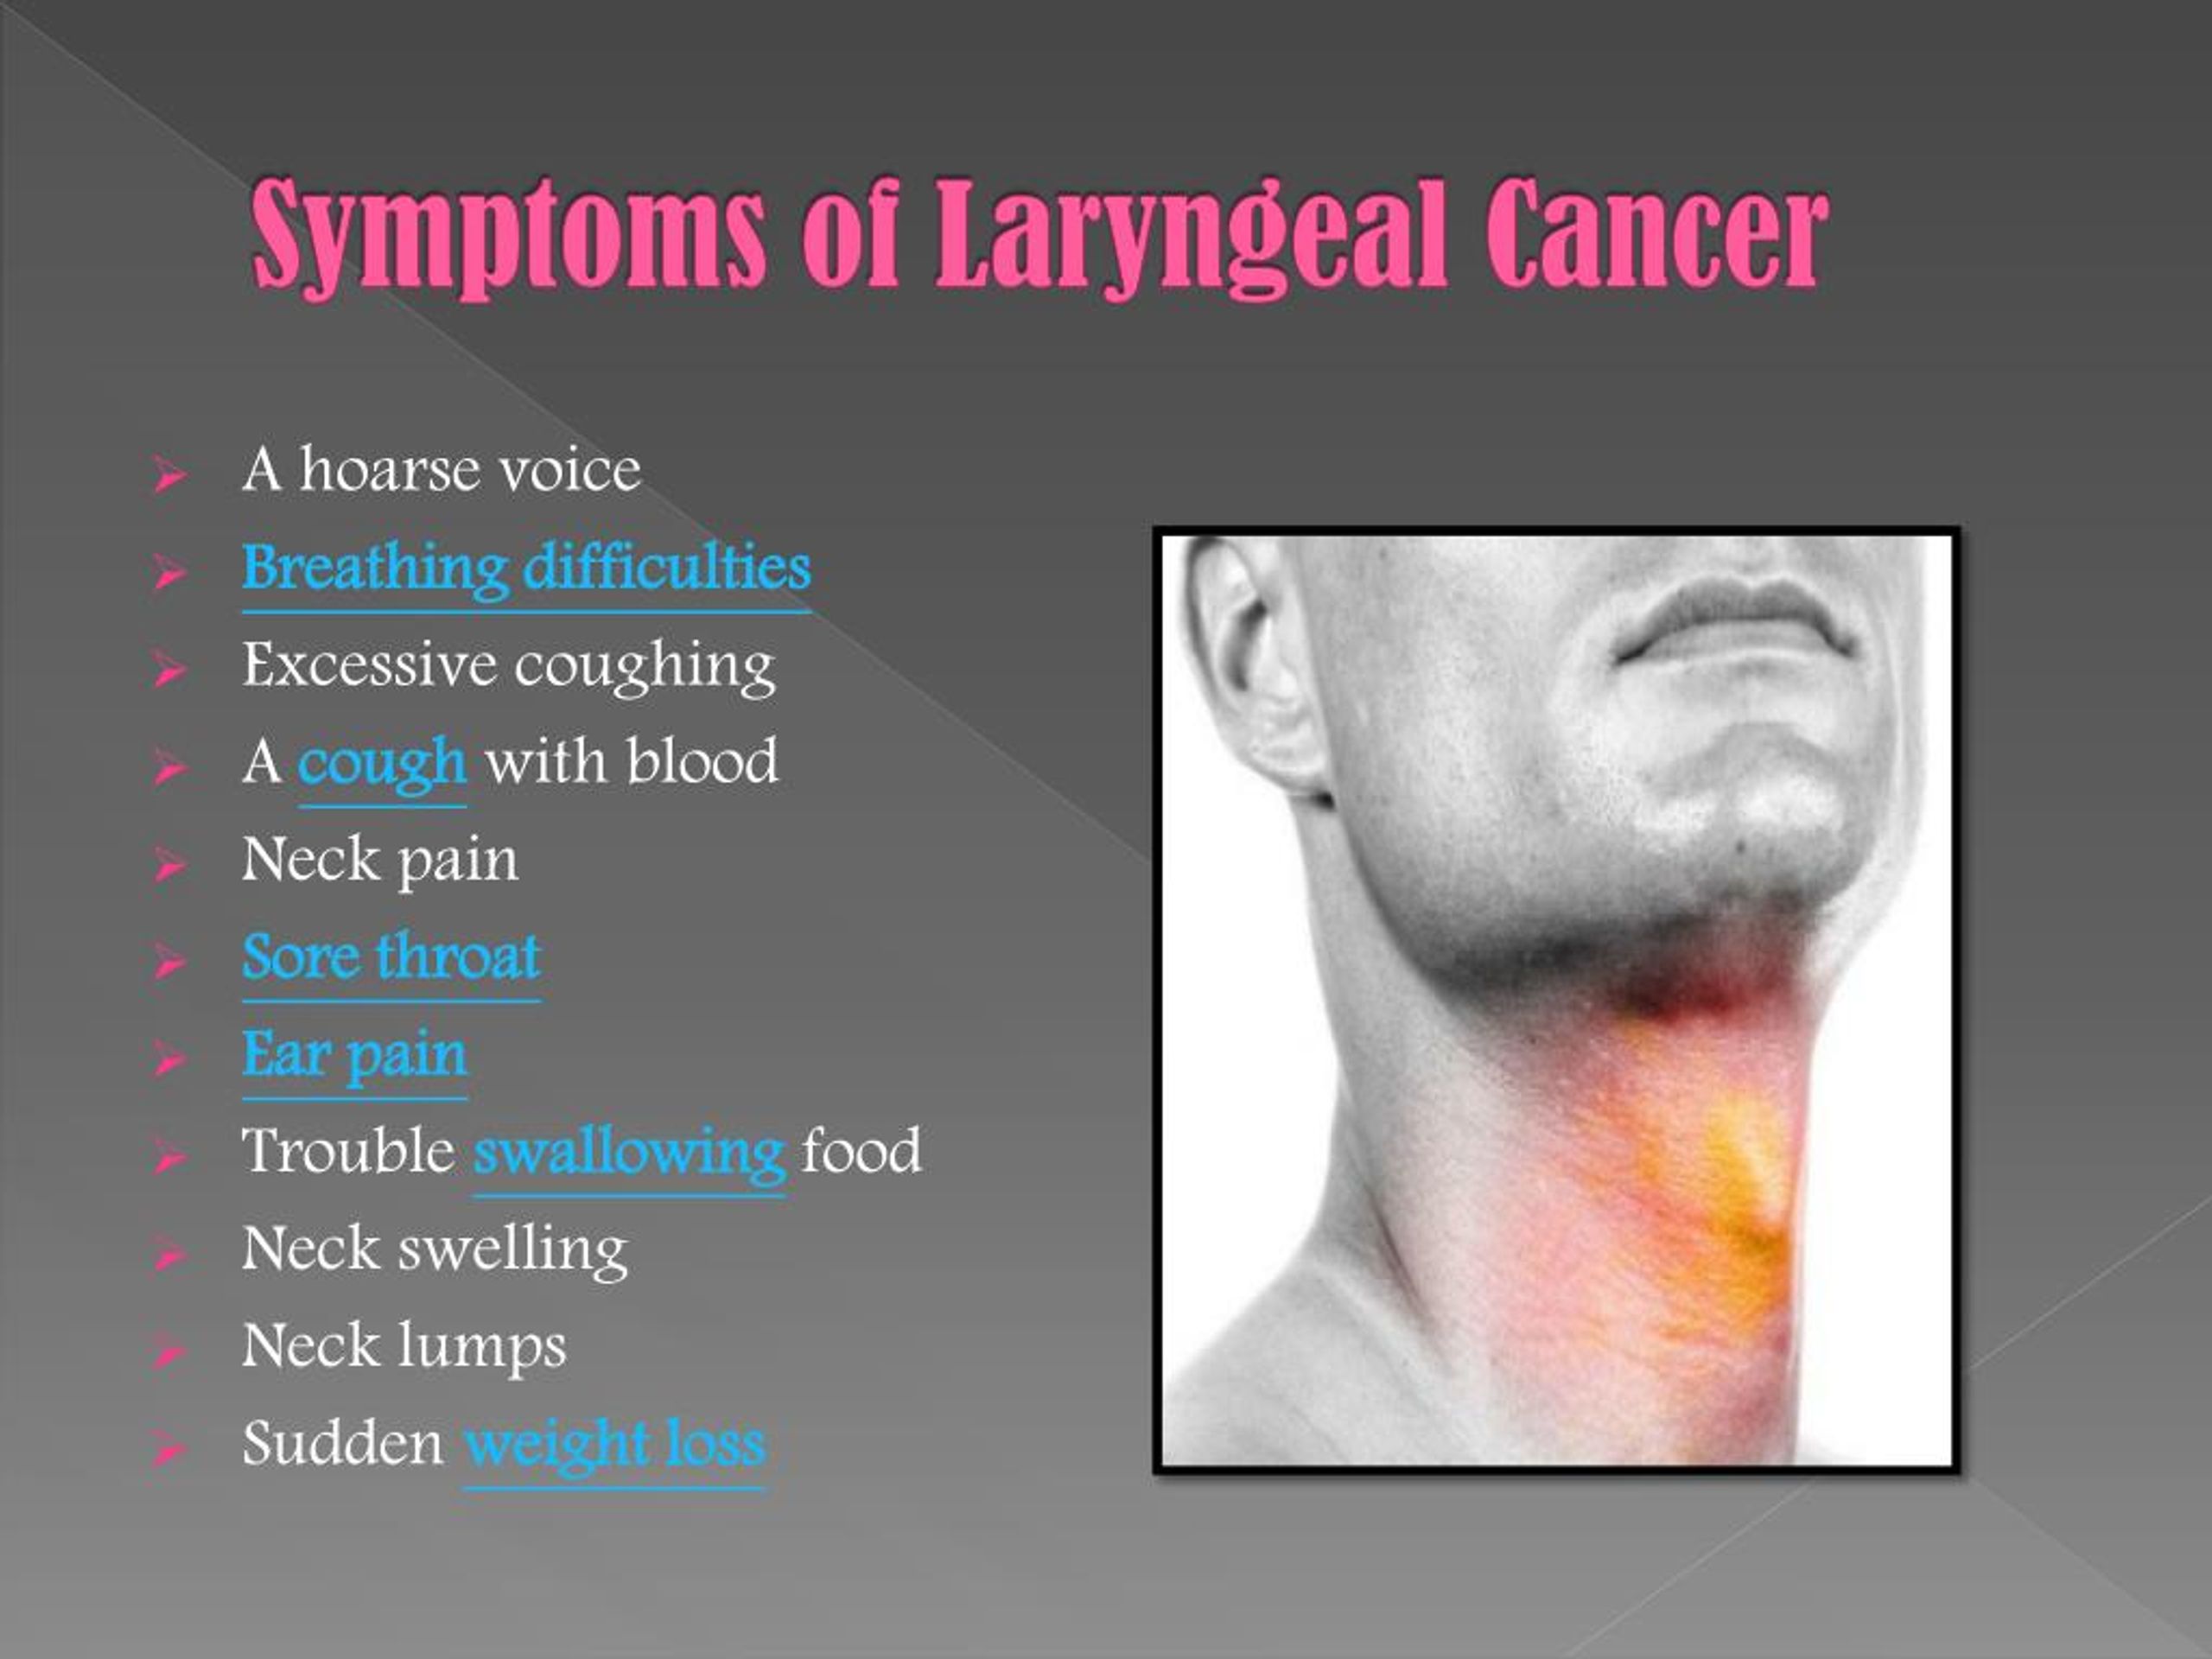 Ppt Laryngeal Cancer Symptoms Causes Diagnosis And Treatment Powerpoint Presentation Id 9134